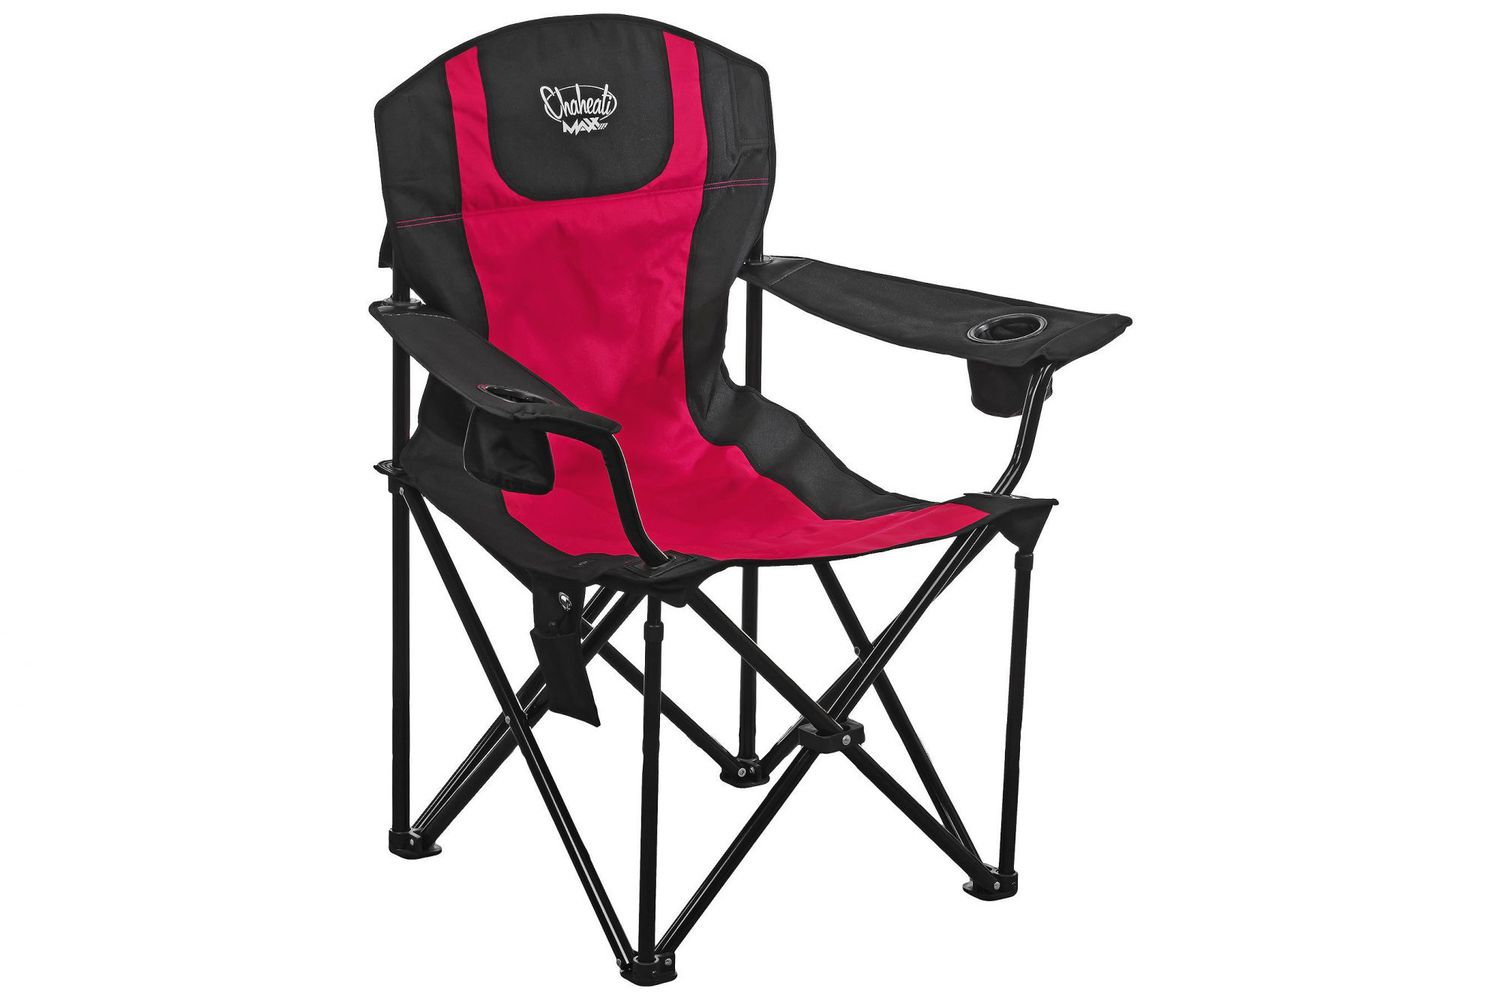 Everyone's Obsessed With This Heated Folding Chair | PEOPLE.com The Folding Chair Has Different Settings